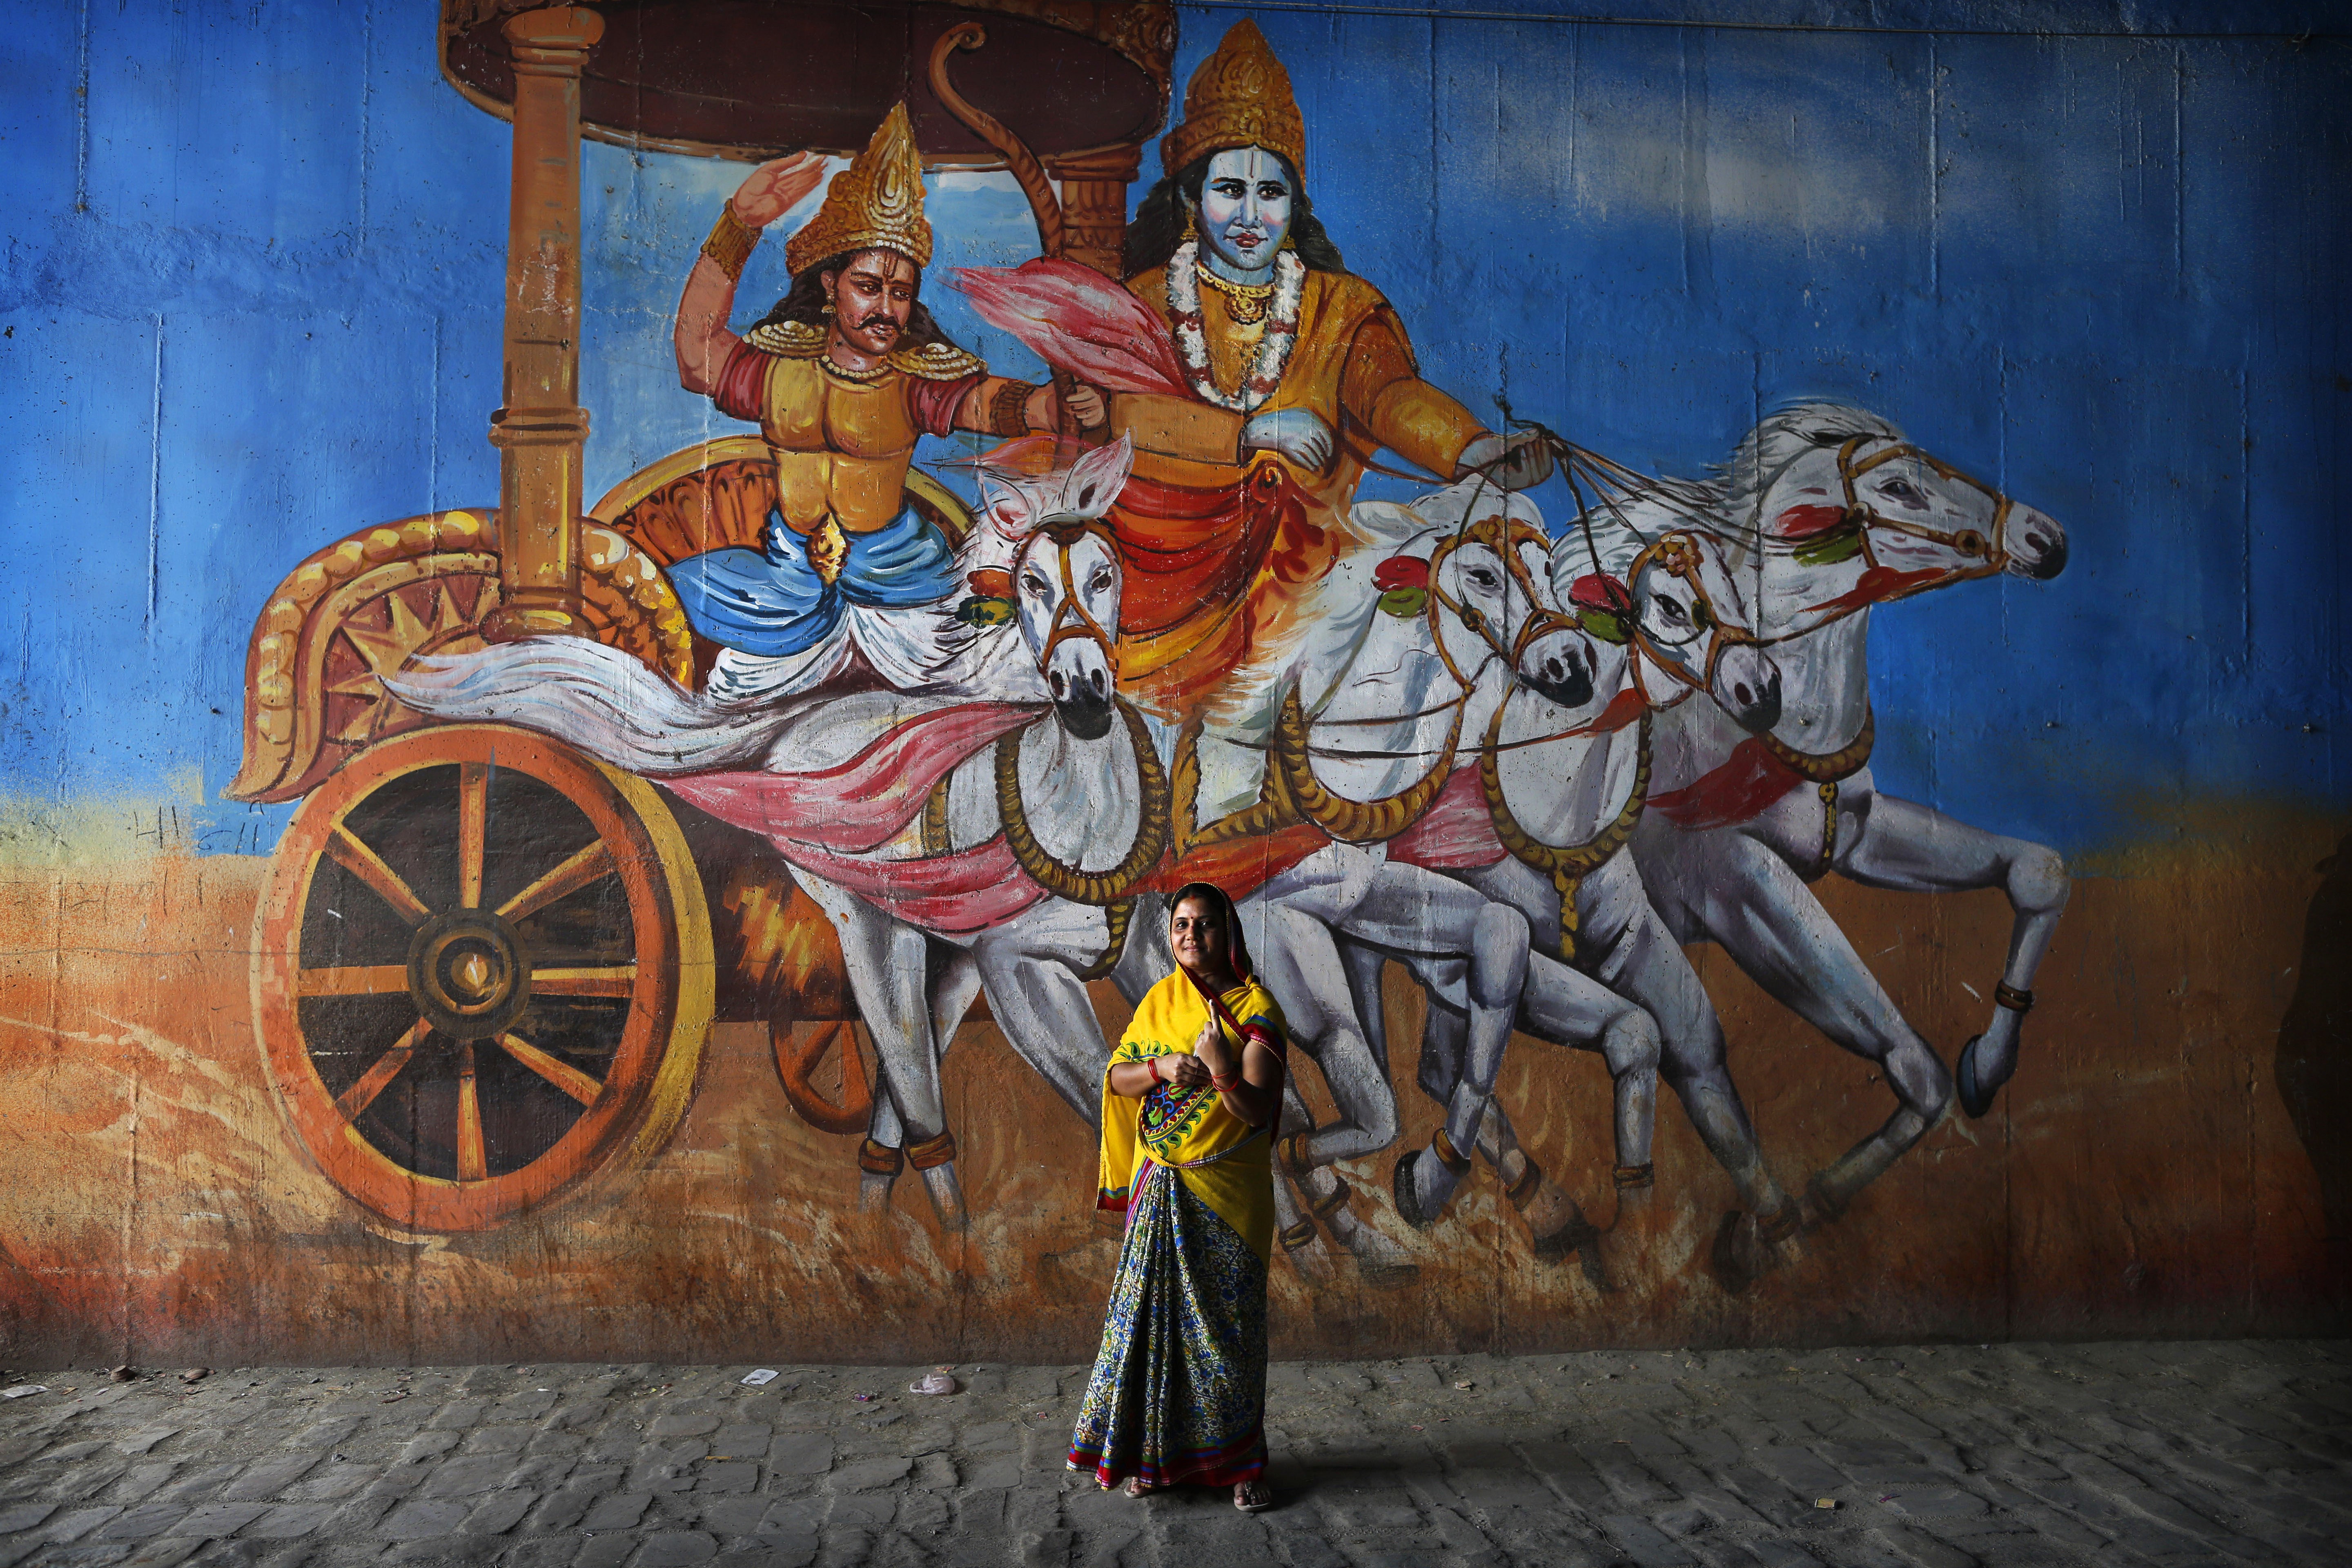 An Indian woman stands in front of a mural depicting a scene from the Hindu epic Mahabharata, as she displays an indelible ink mark on her finger, proof of having cast her vote in national elections, on May 12, 2019, in Prayagraj in the northern state of Uttar Pradesh. Photo: AP